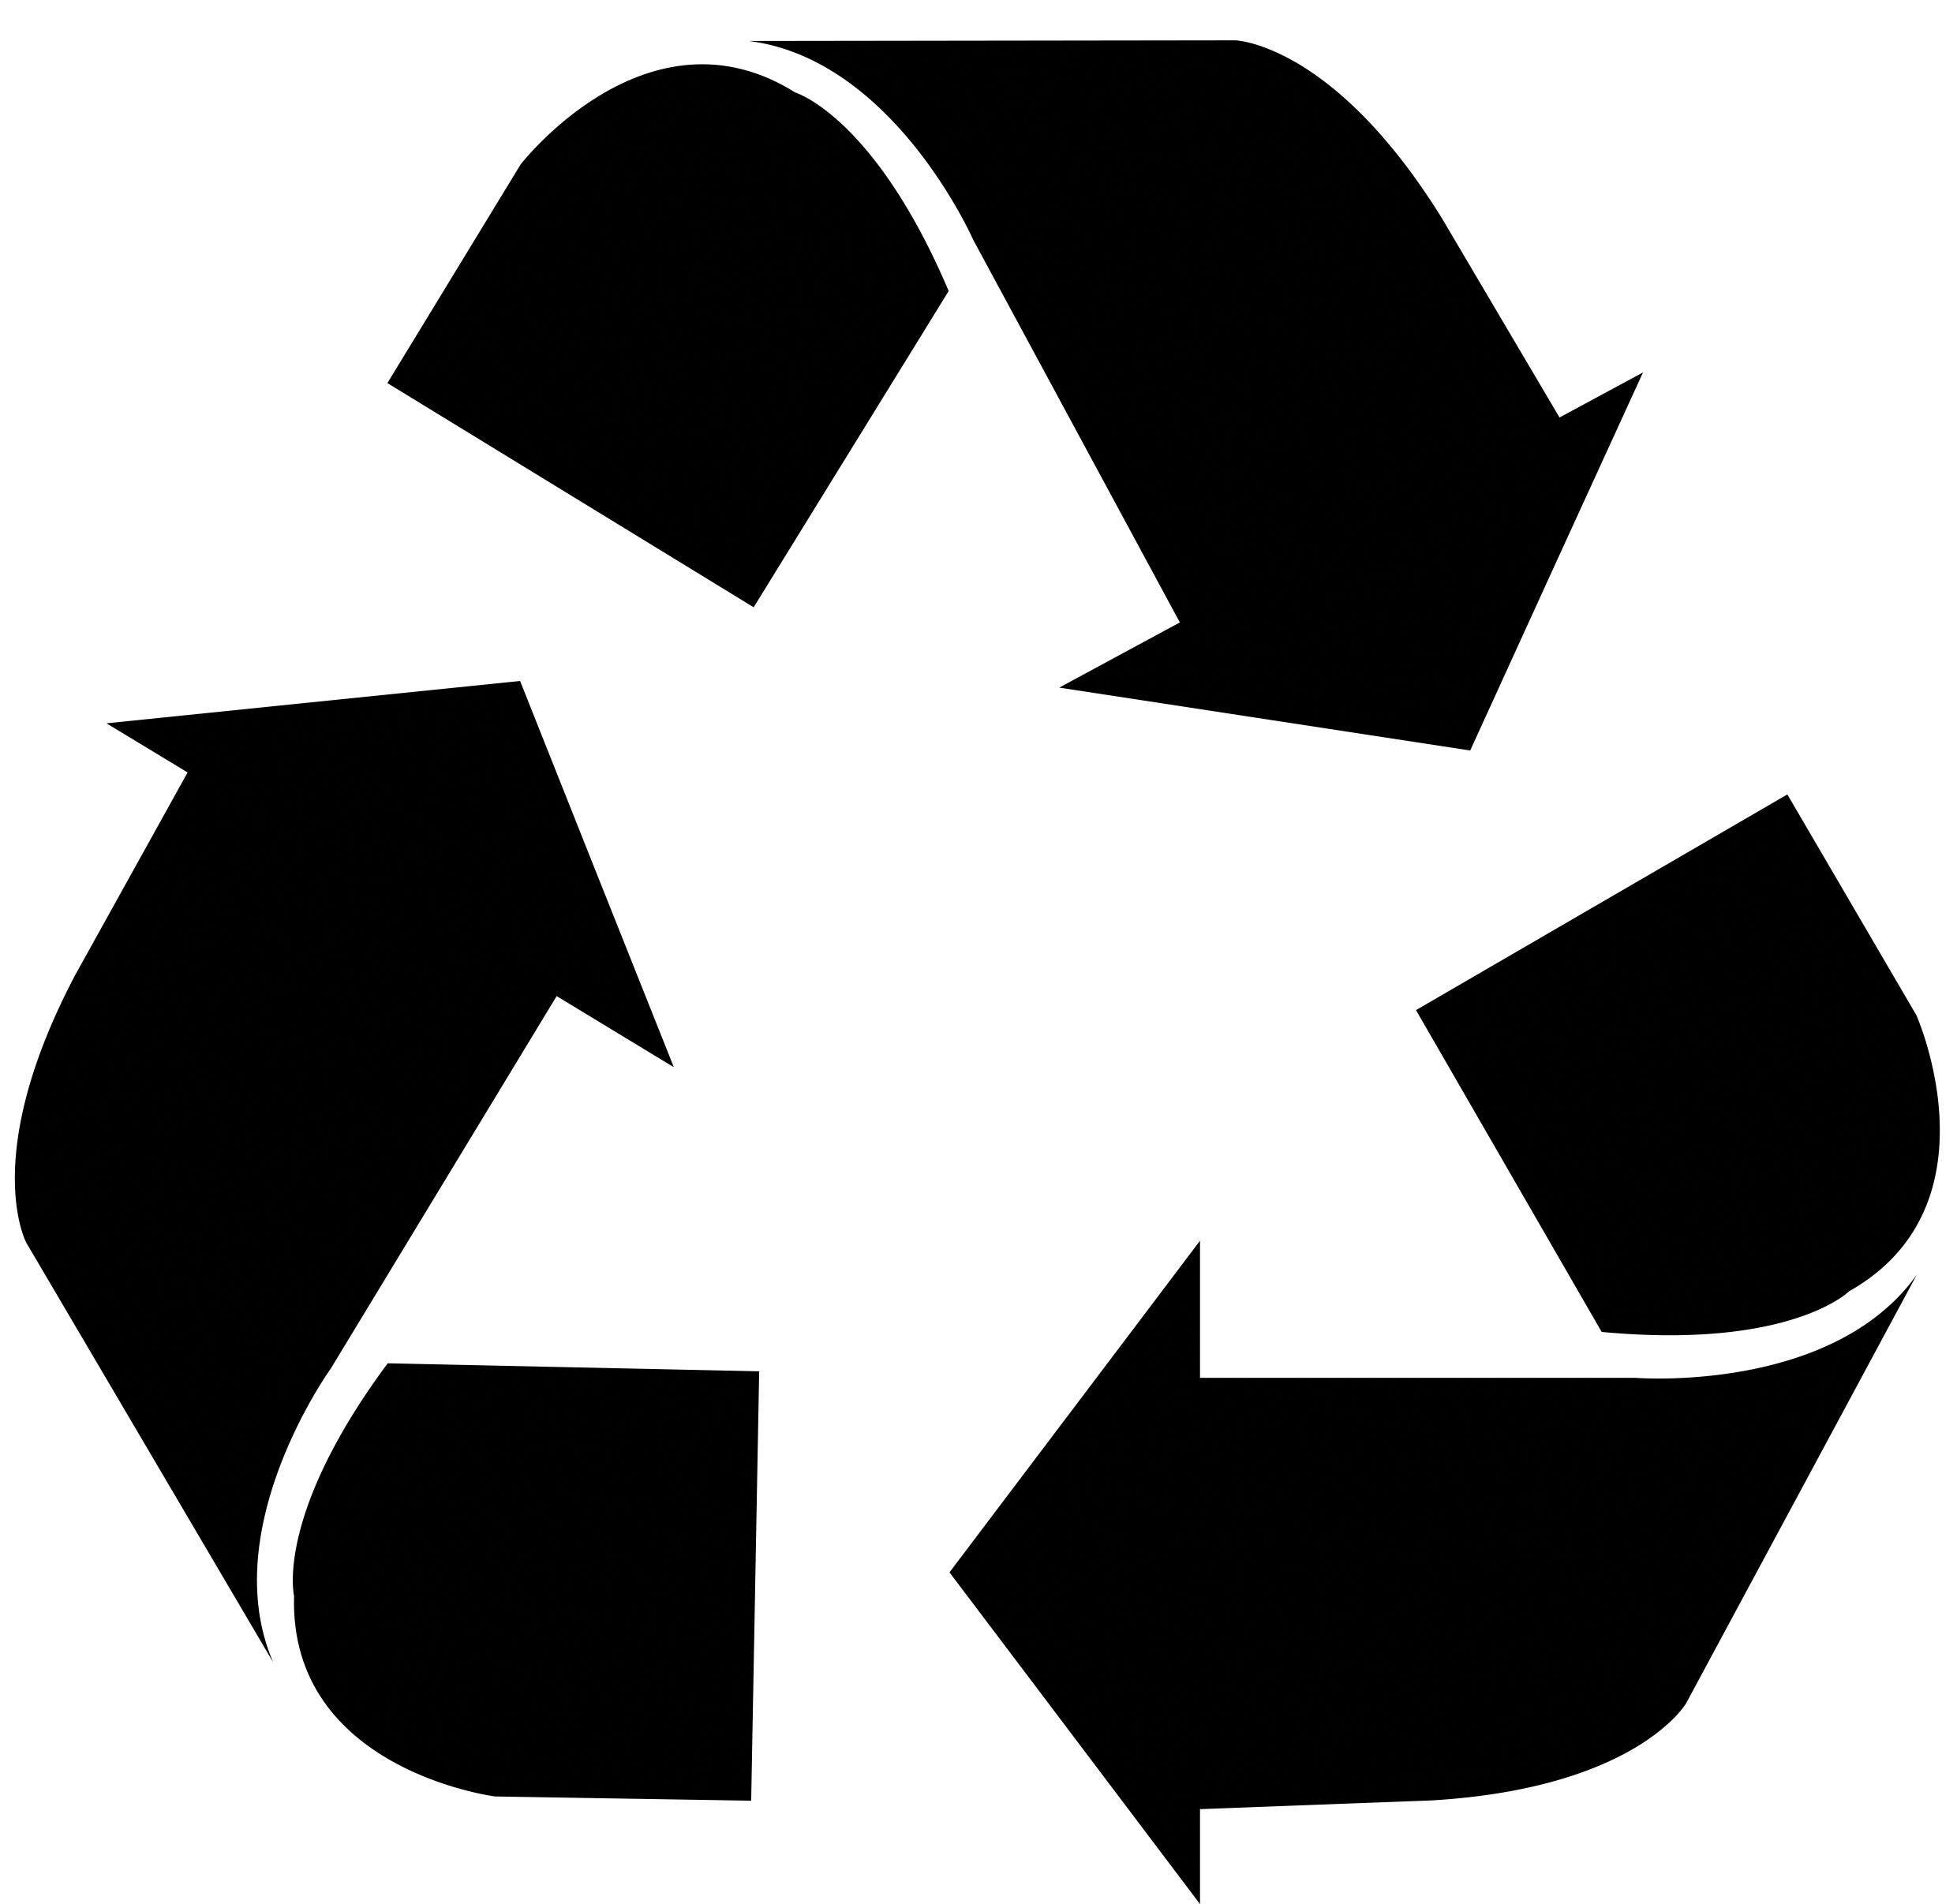 Recycle Logo - recycle logo Large Image. recycling. Recycling, Symbols